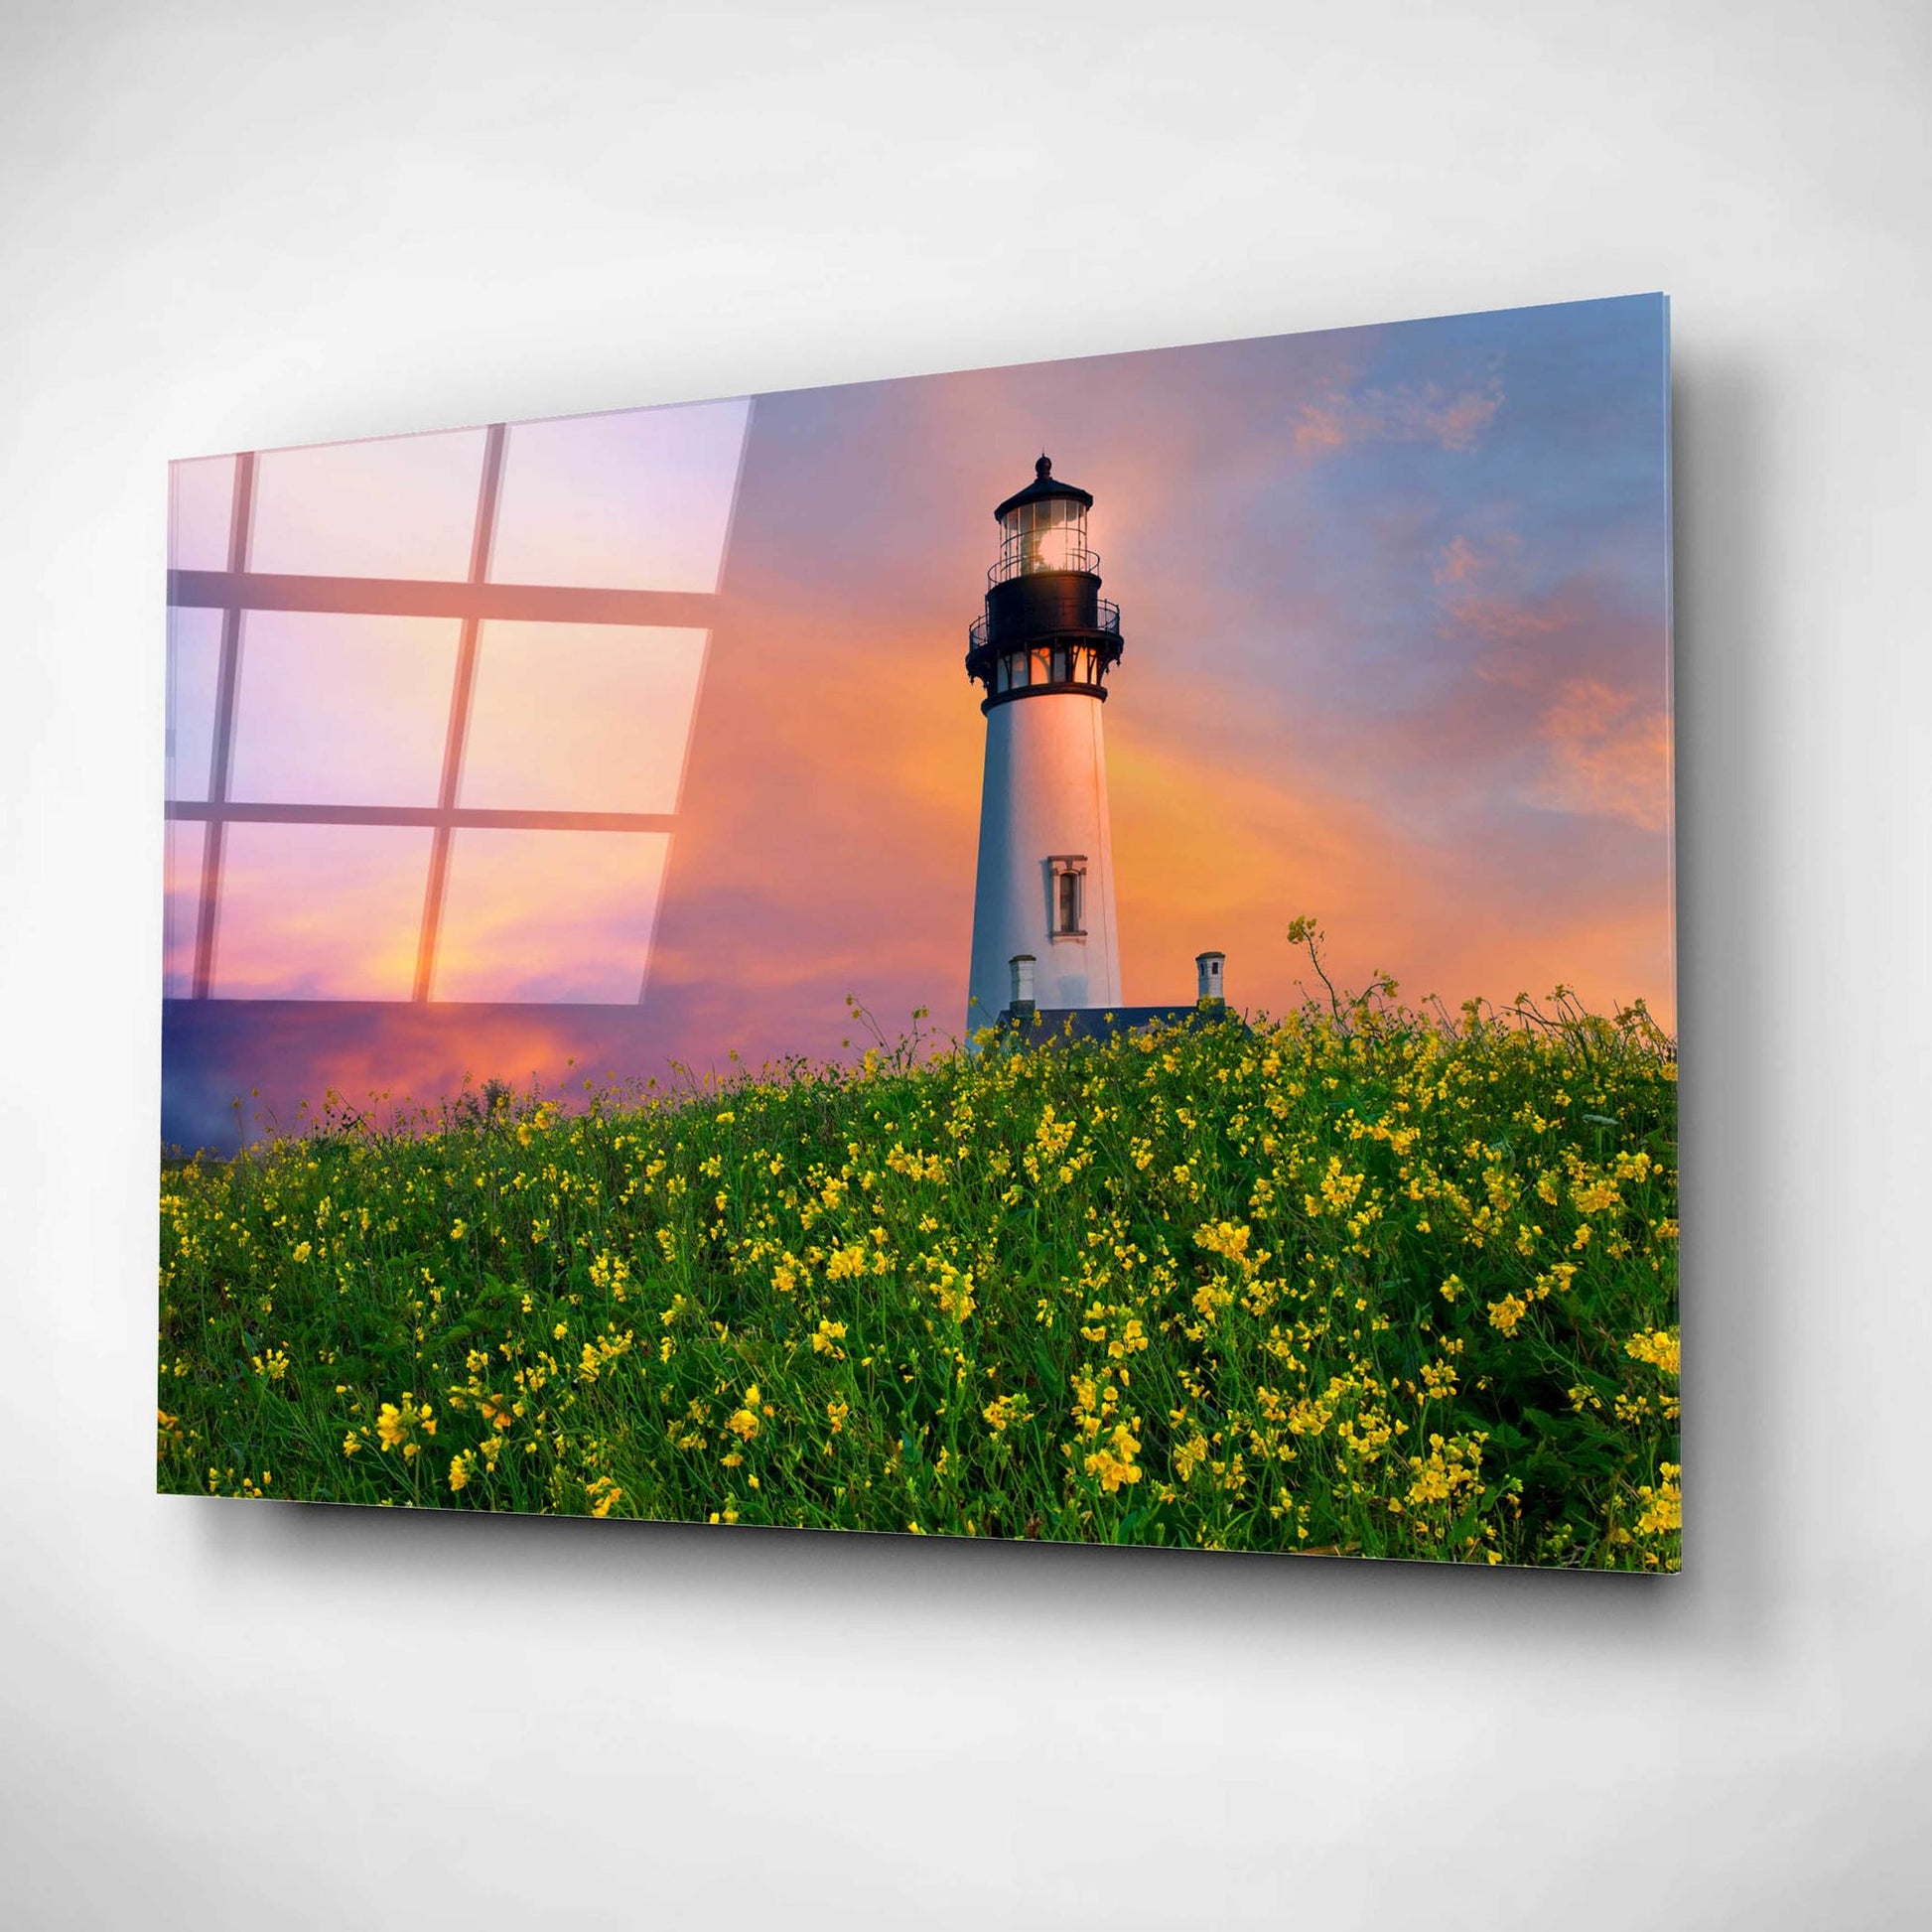 Epic Art 'Lighthouse' by Dennis Frates, Acrylic Glass Wall Art,24x16